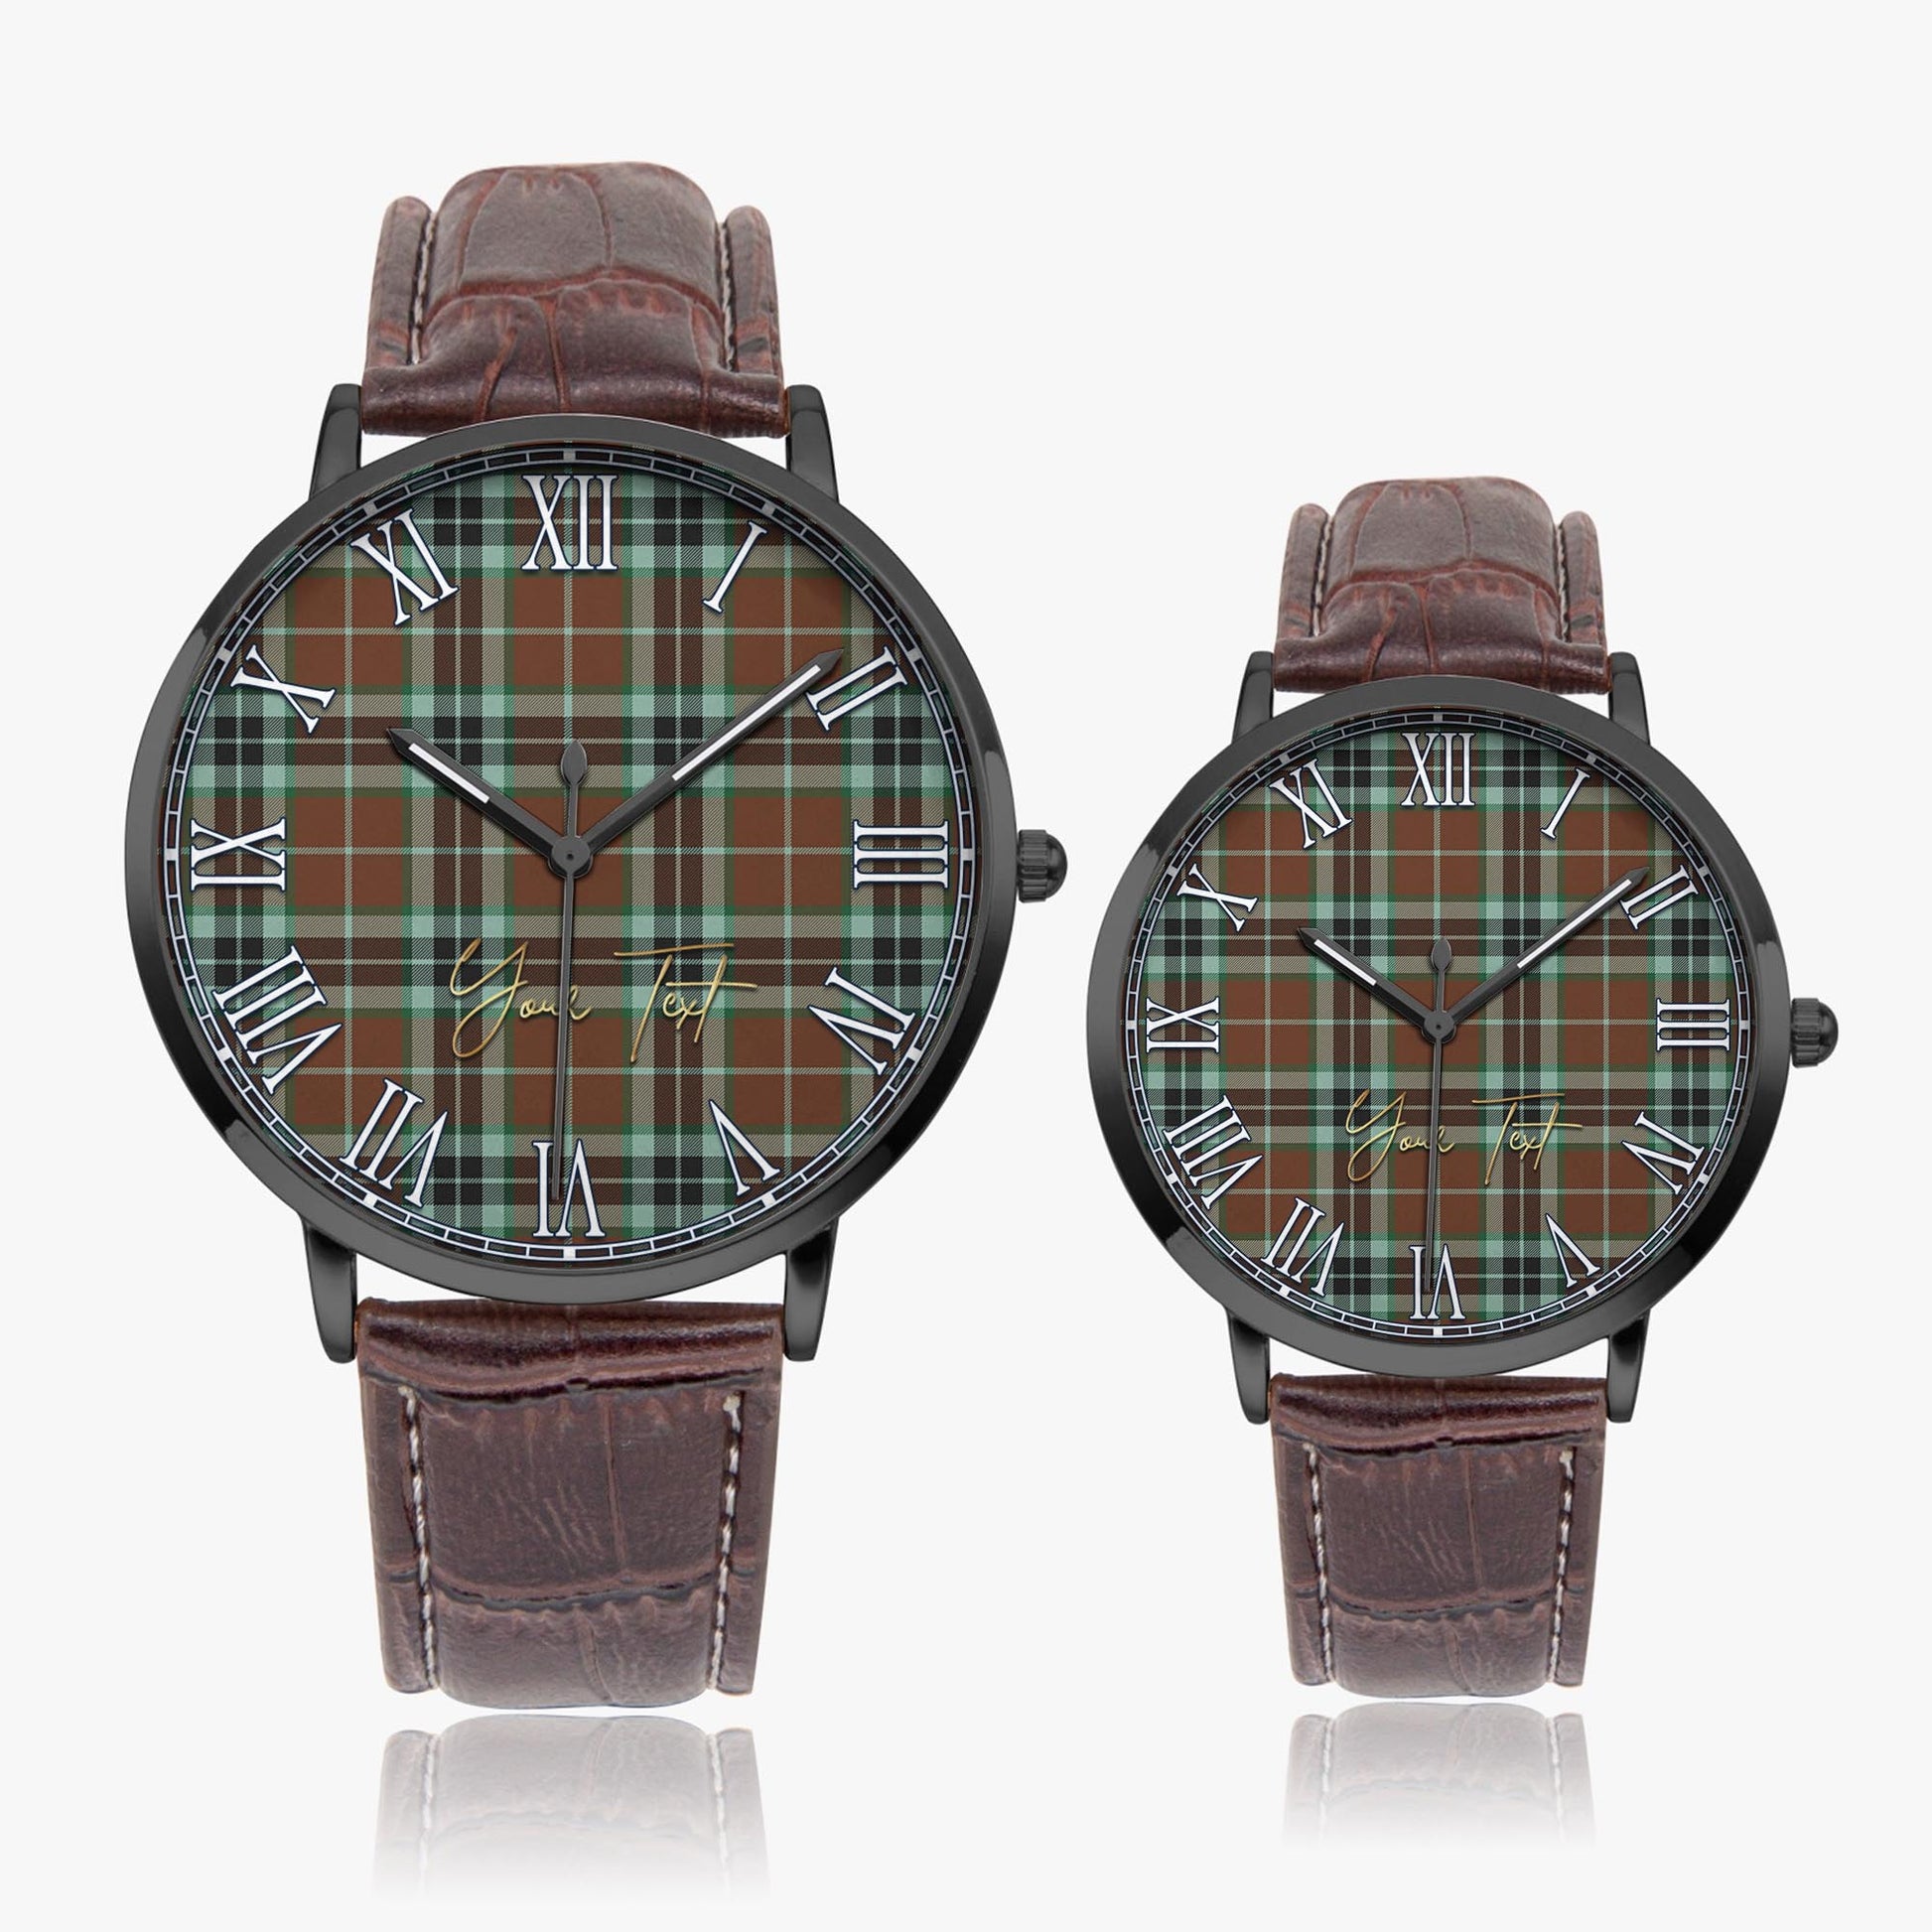 Thomson Hunting Modern Tartan Personalized Your Text Leather Trap Quartz Watch Ultra Thin Black Case With Brown Leather Strap - Tartanvibesclothing Shop